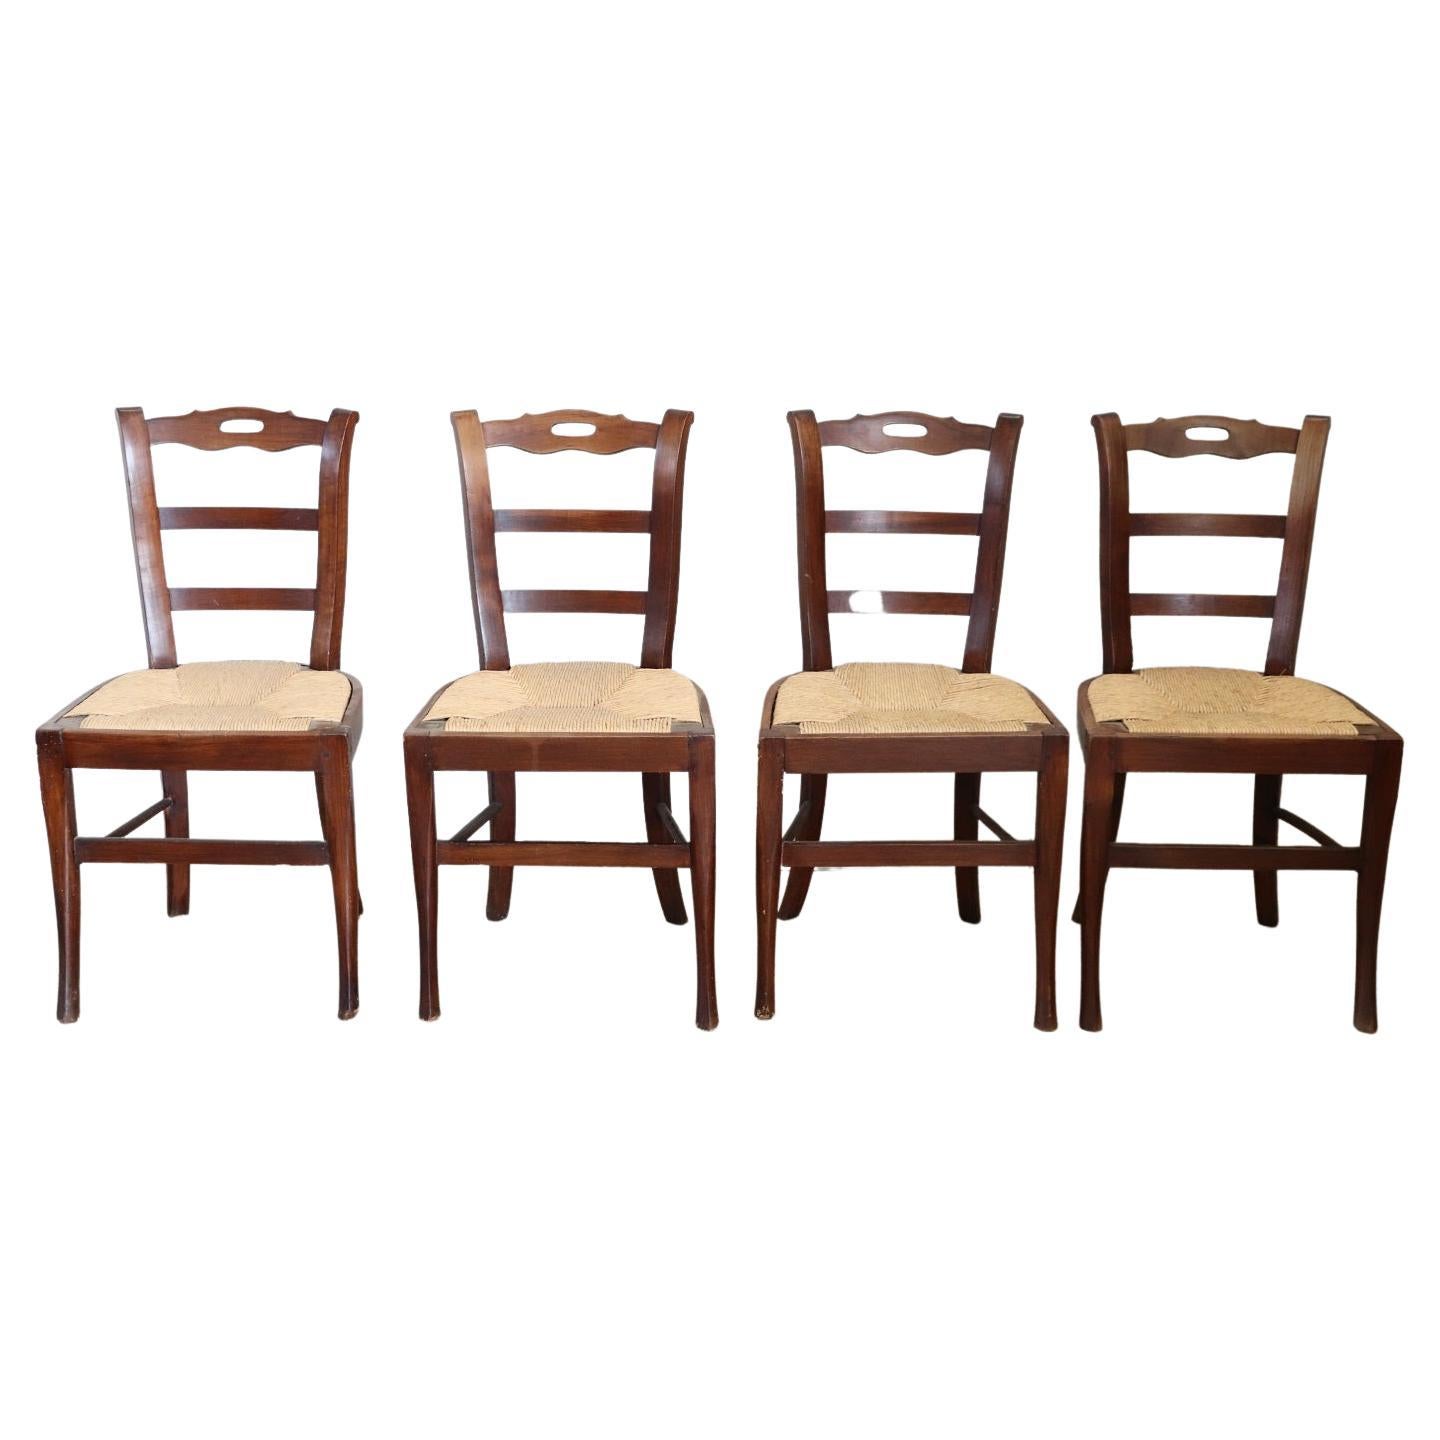 19th Century Set of Four Antique Chairs in Cherry Wood with Straw Seat